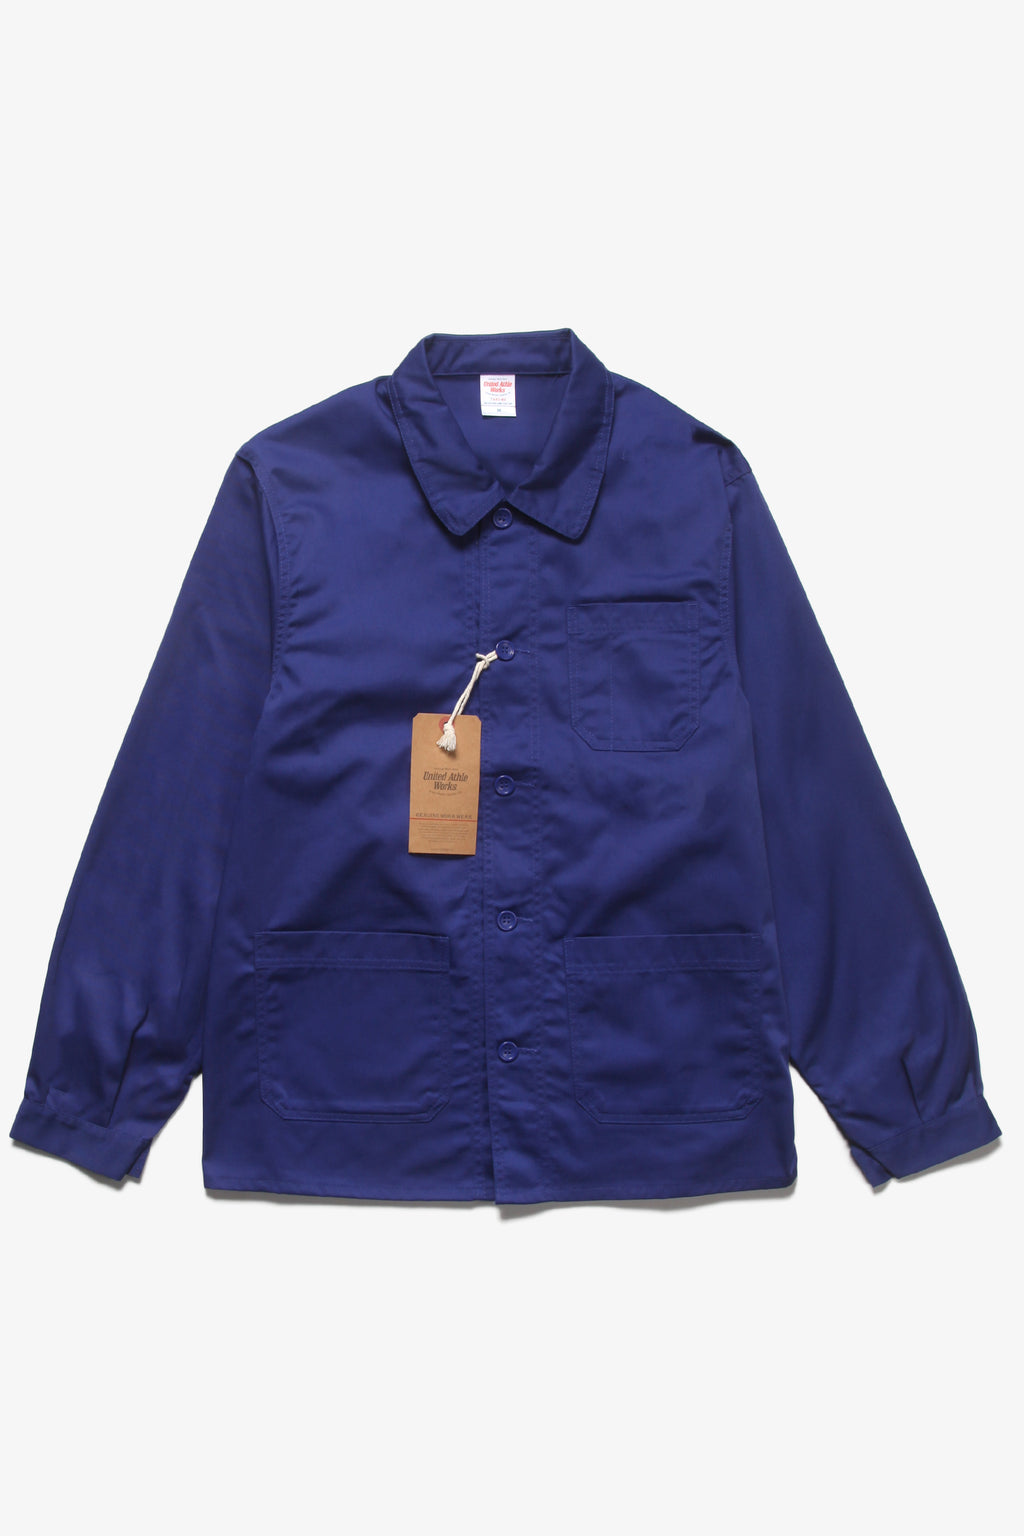 United Athle Works - 7452 Coverall Jacket - Work Blue